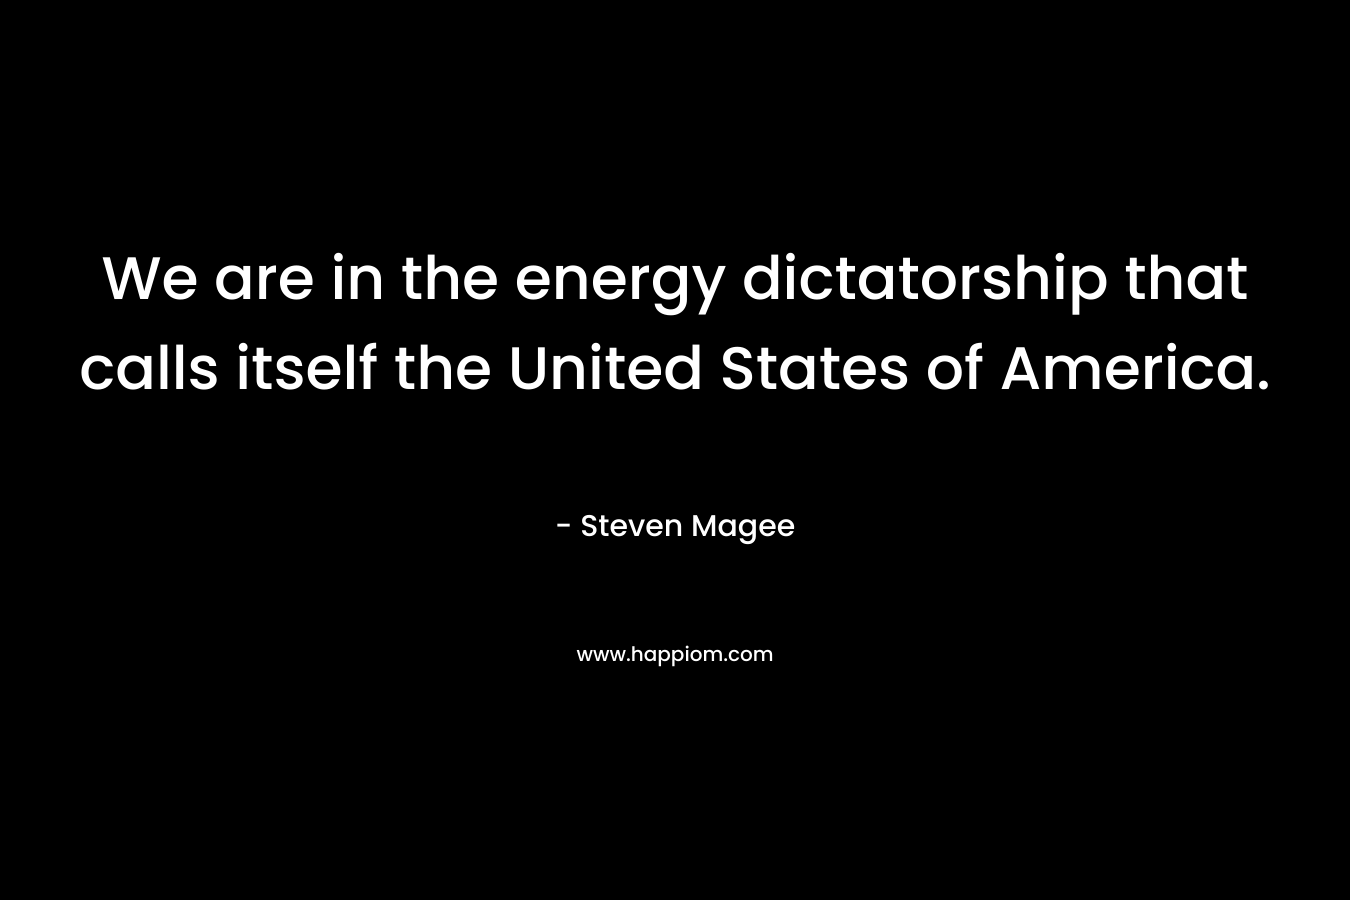 We are in the energy dictatorship that calls itself the United States of America.